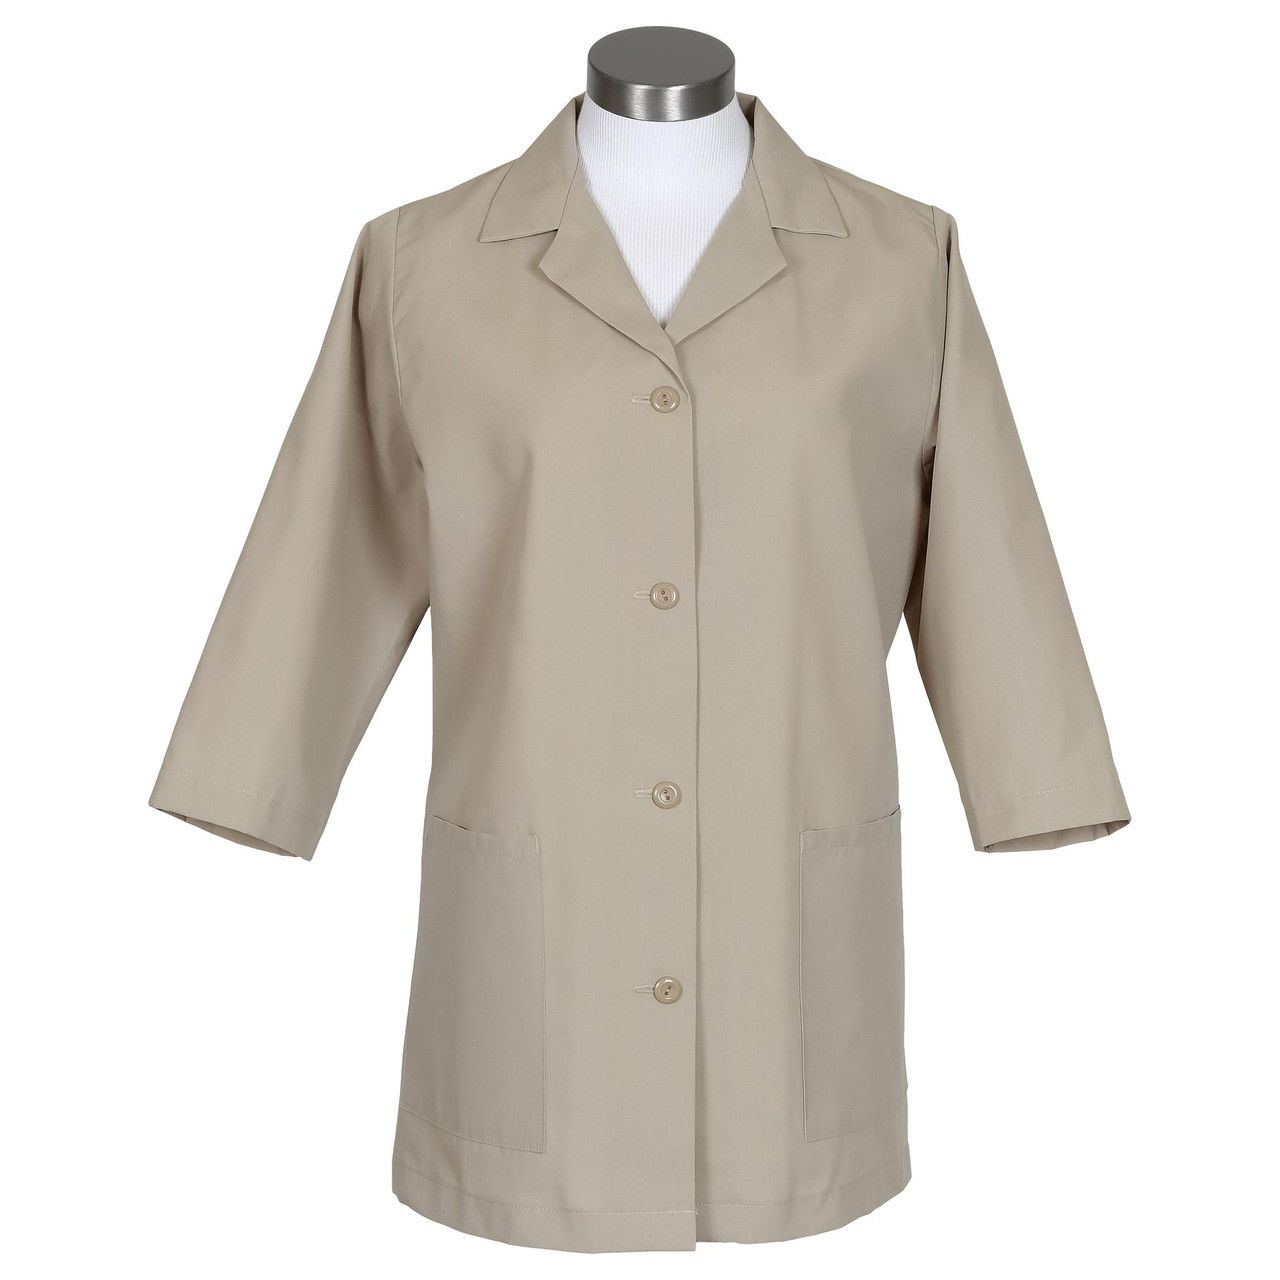 Can you detail the design of the sleeves on the tan smock in the Fame 72 female range?